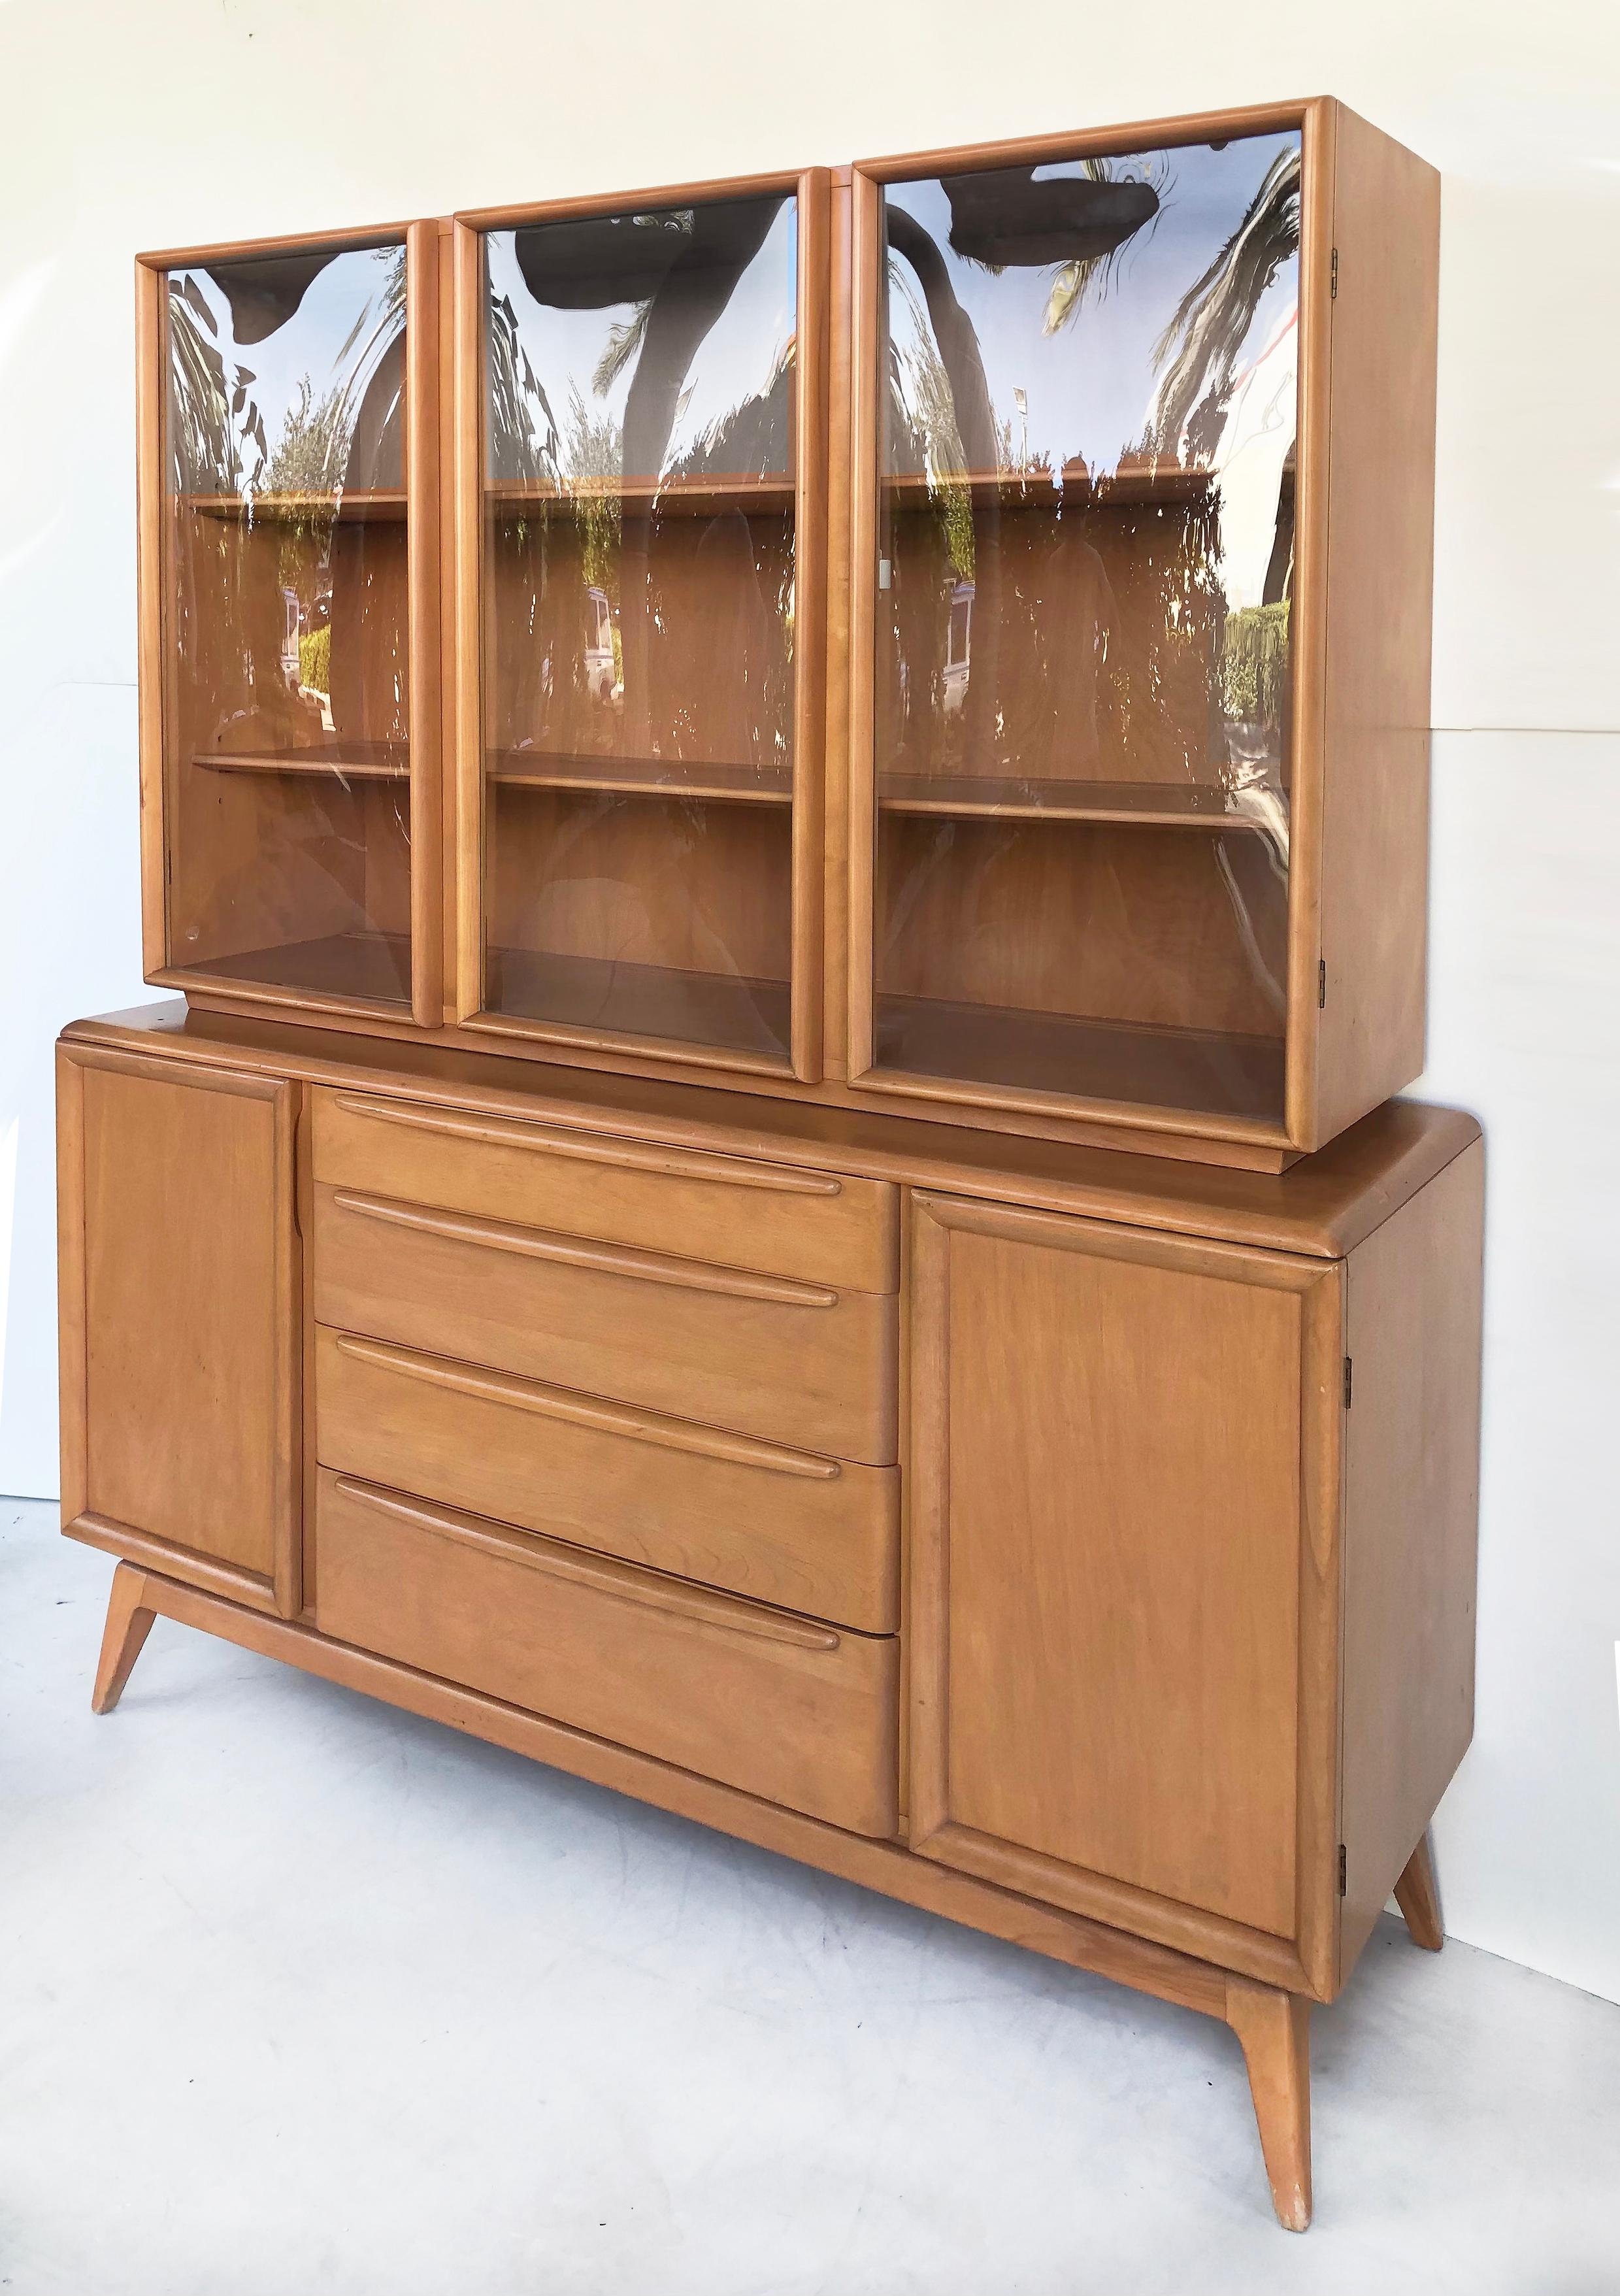 Heywood Wakefield Mid-century Bubble Glass Breakfront China cabinet

Offered for sale is a mid-century modern Heywood Wakefield two-part china cabinet on stand with bubble glass doors. The top cabinet has three bubbled glass doors that open to